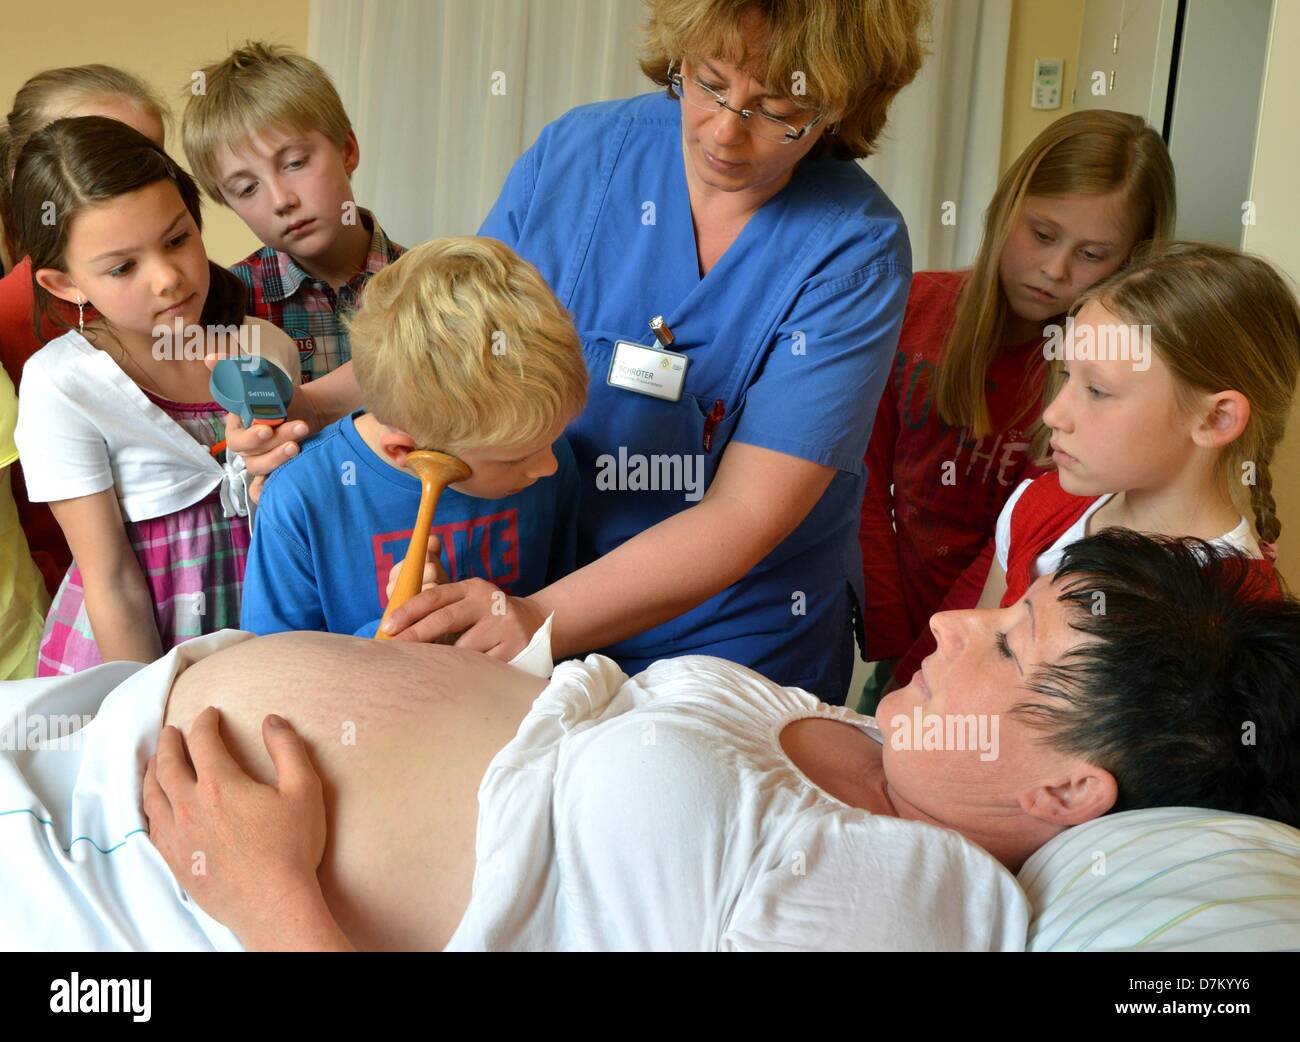 Third graders of the primary school Halle-Kröllwitz accompany the head physician of the hospital St. Elisabeth and St. Barbara Sven Seeger to an examination of a pregnant woman in Halle, Germany, 25 April 2013. Photo:  Waltraud Grubitzsch Stock Photo